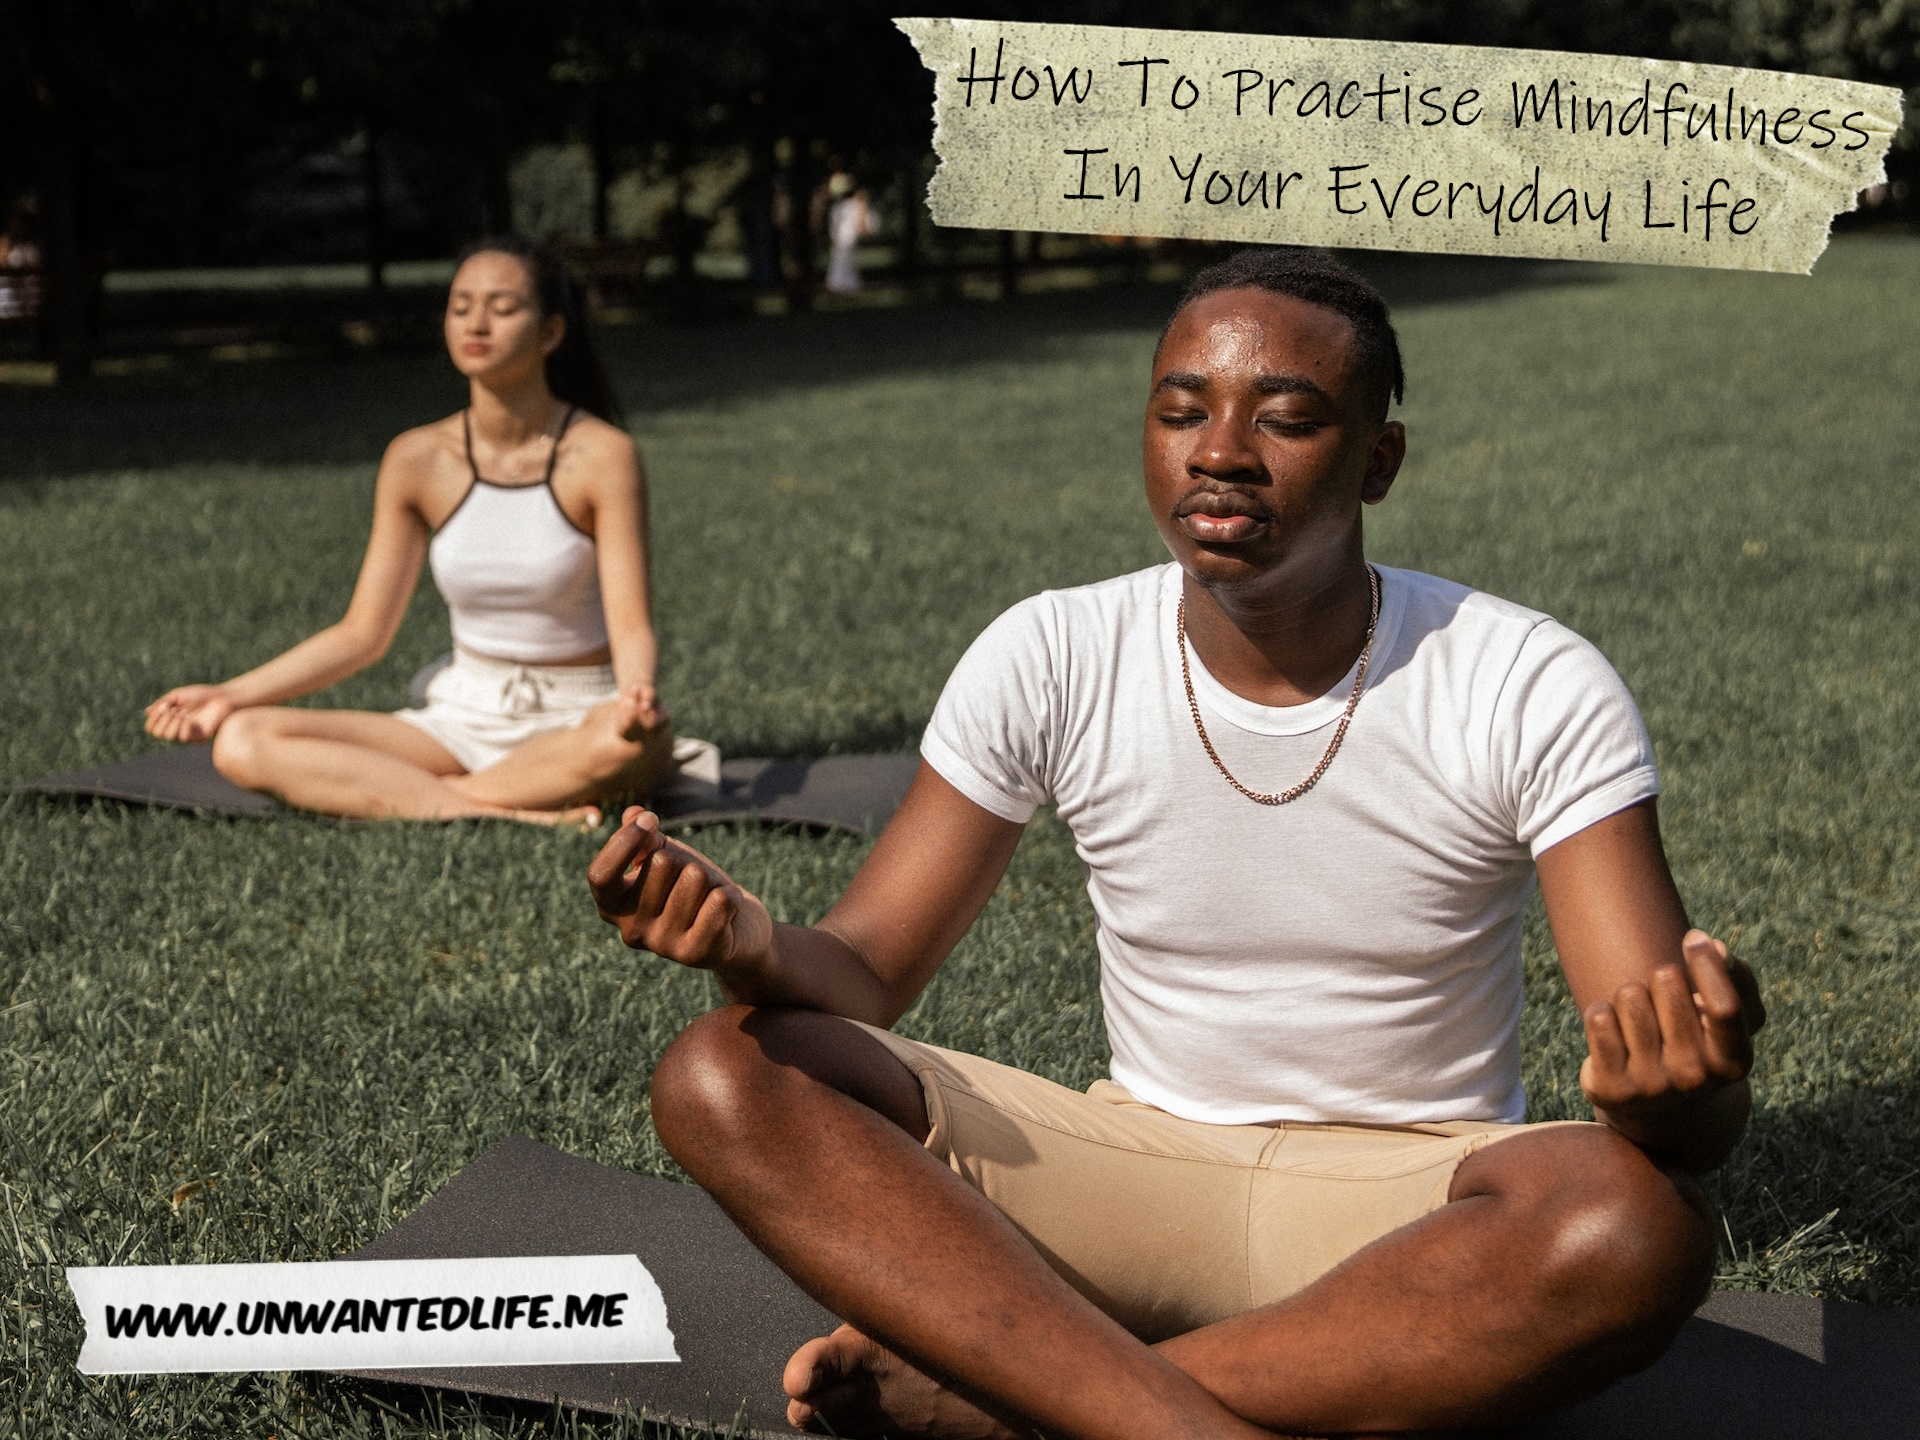 A photo of a Black man and an Asian woman meditating in the park to represent the topic of the article - How To Practise Mindfulness In Your Everyday Life